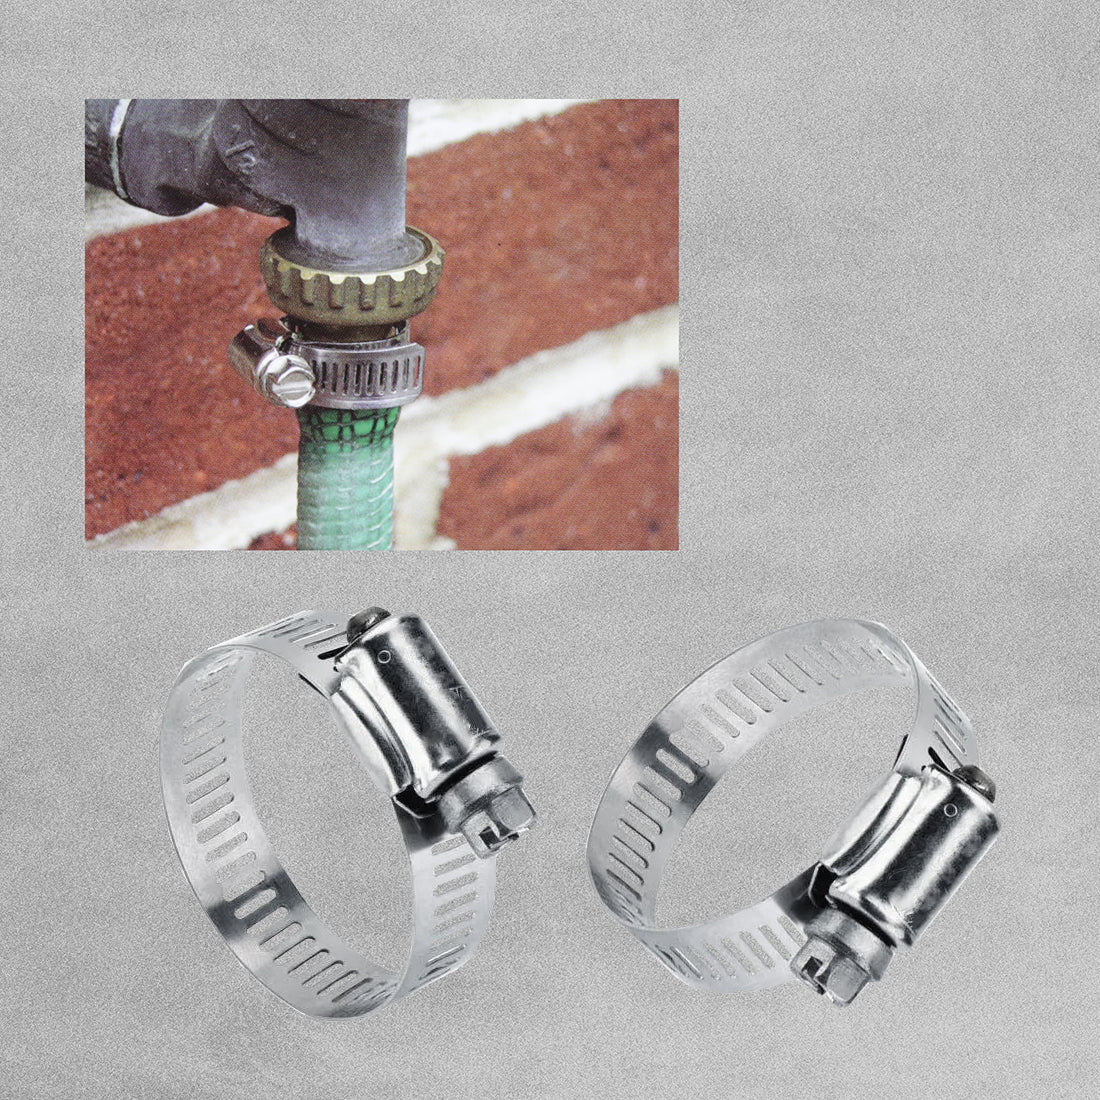 Hose/Jubilee Clips - 19-25mm / 3/4-1" - Pack of 2